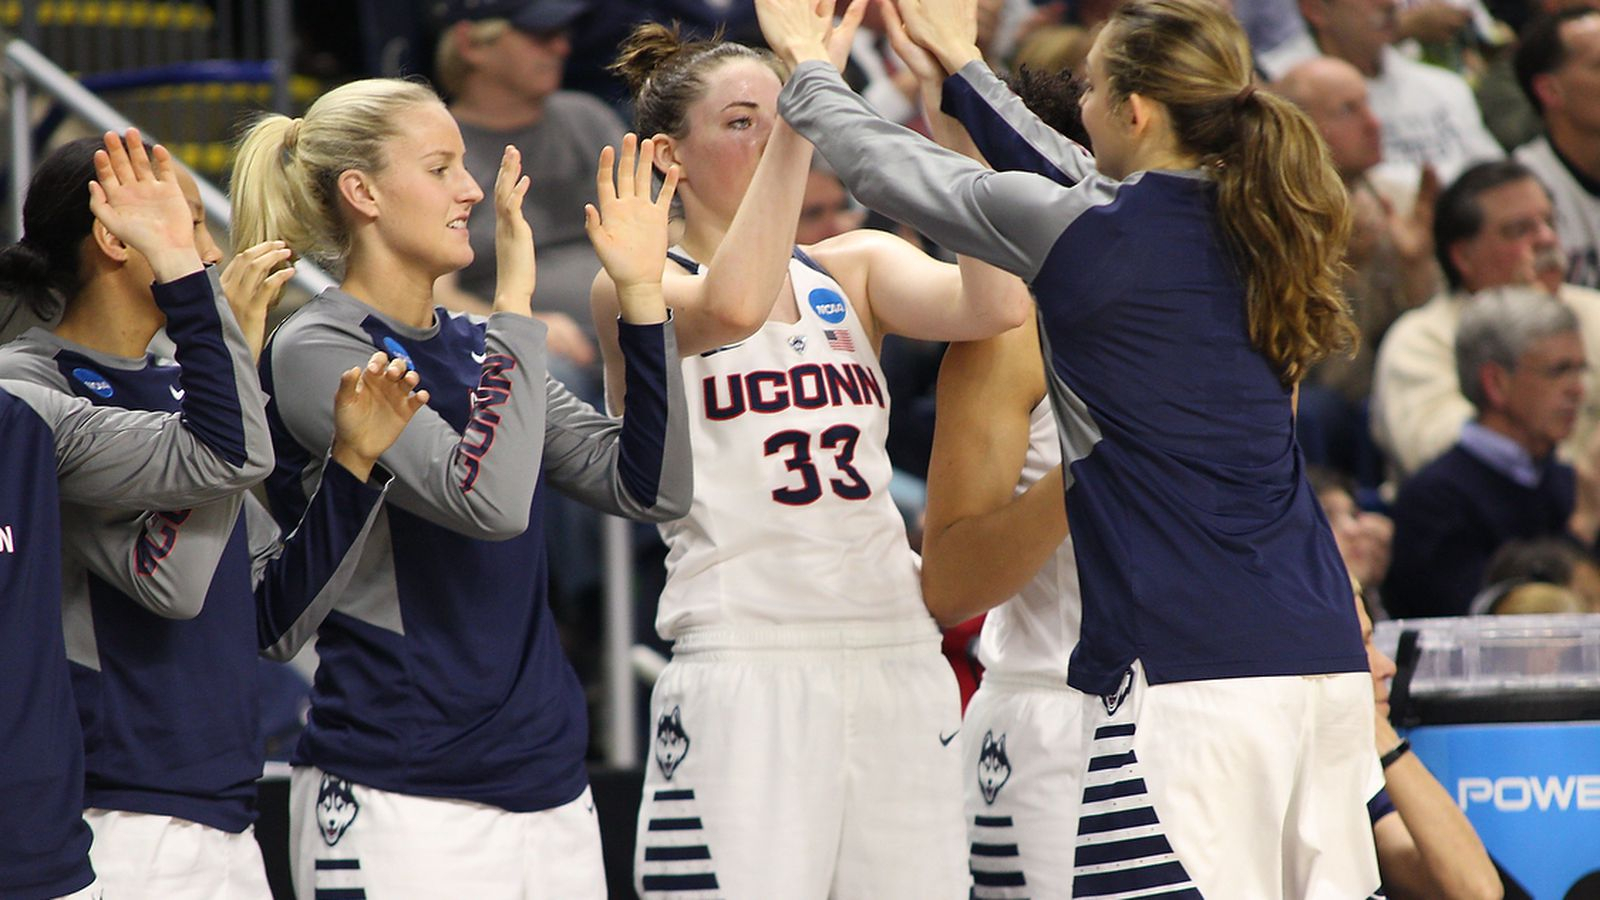 Printable Schedule For Uconn Women s Basketball 